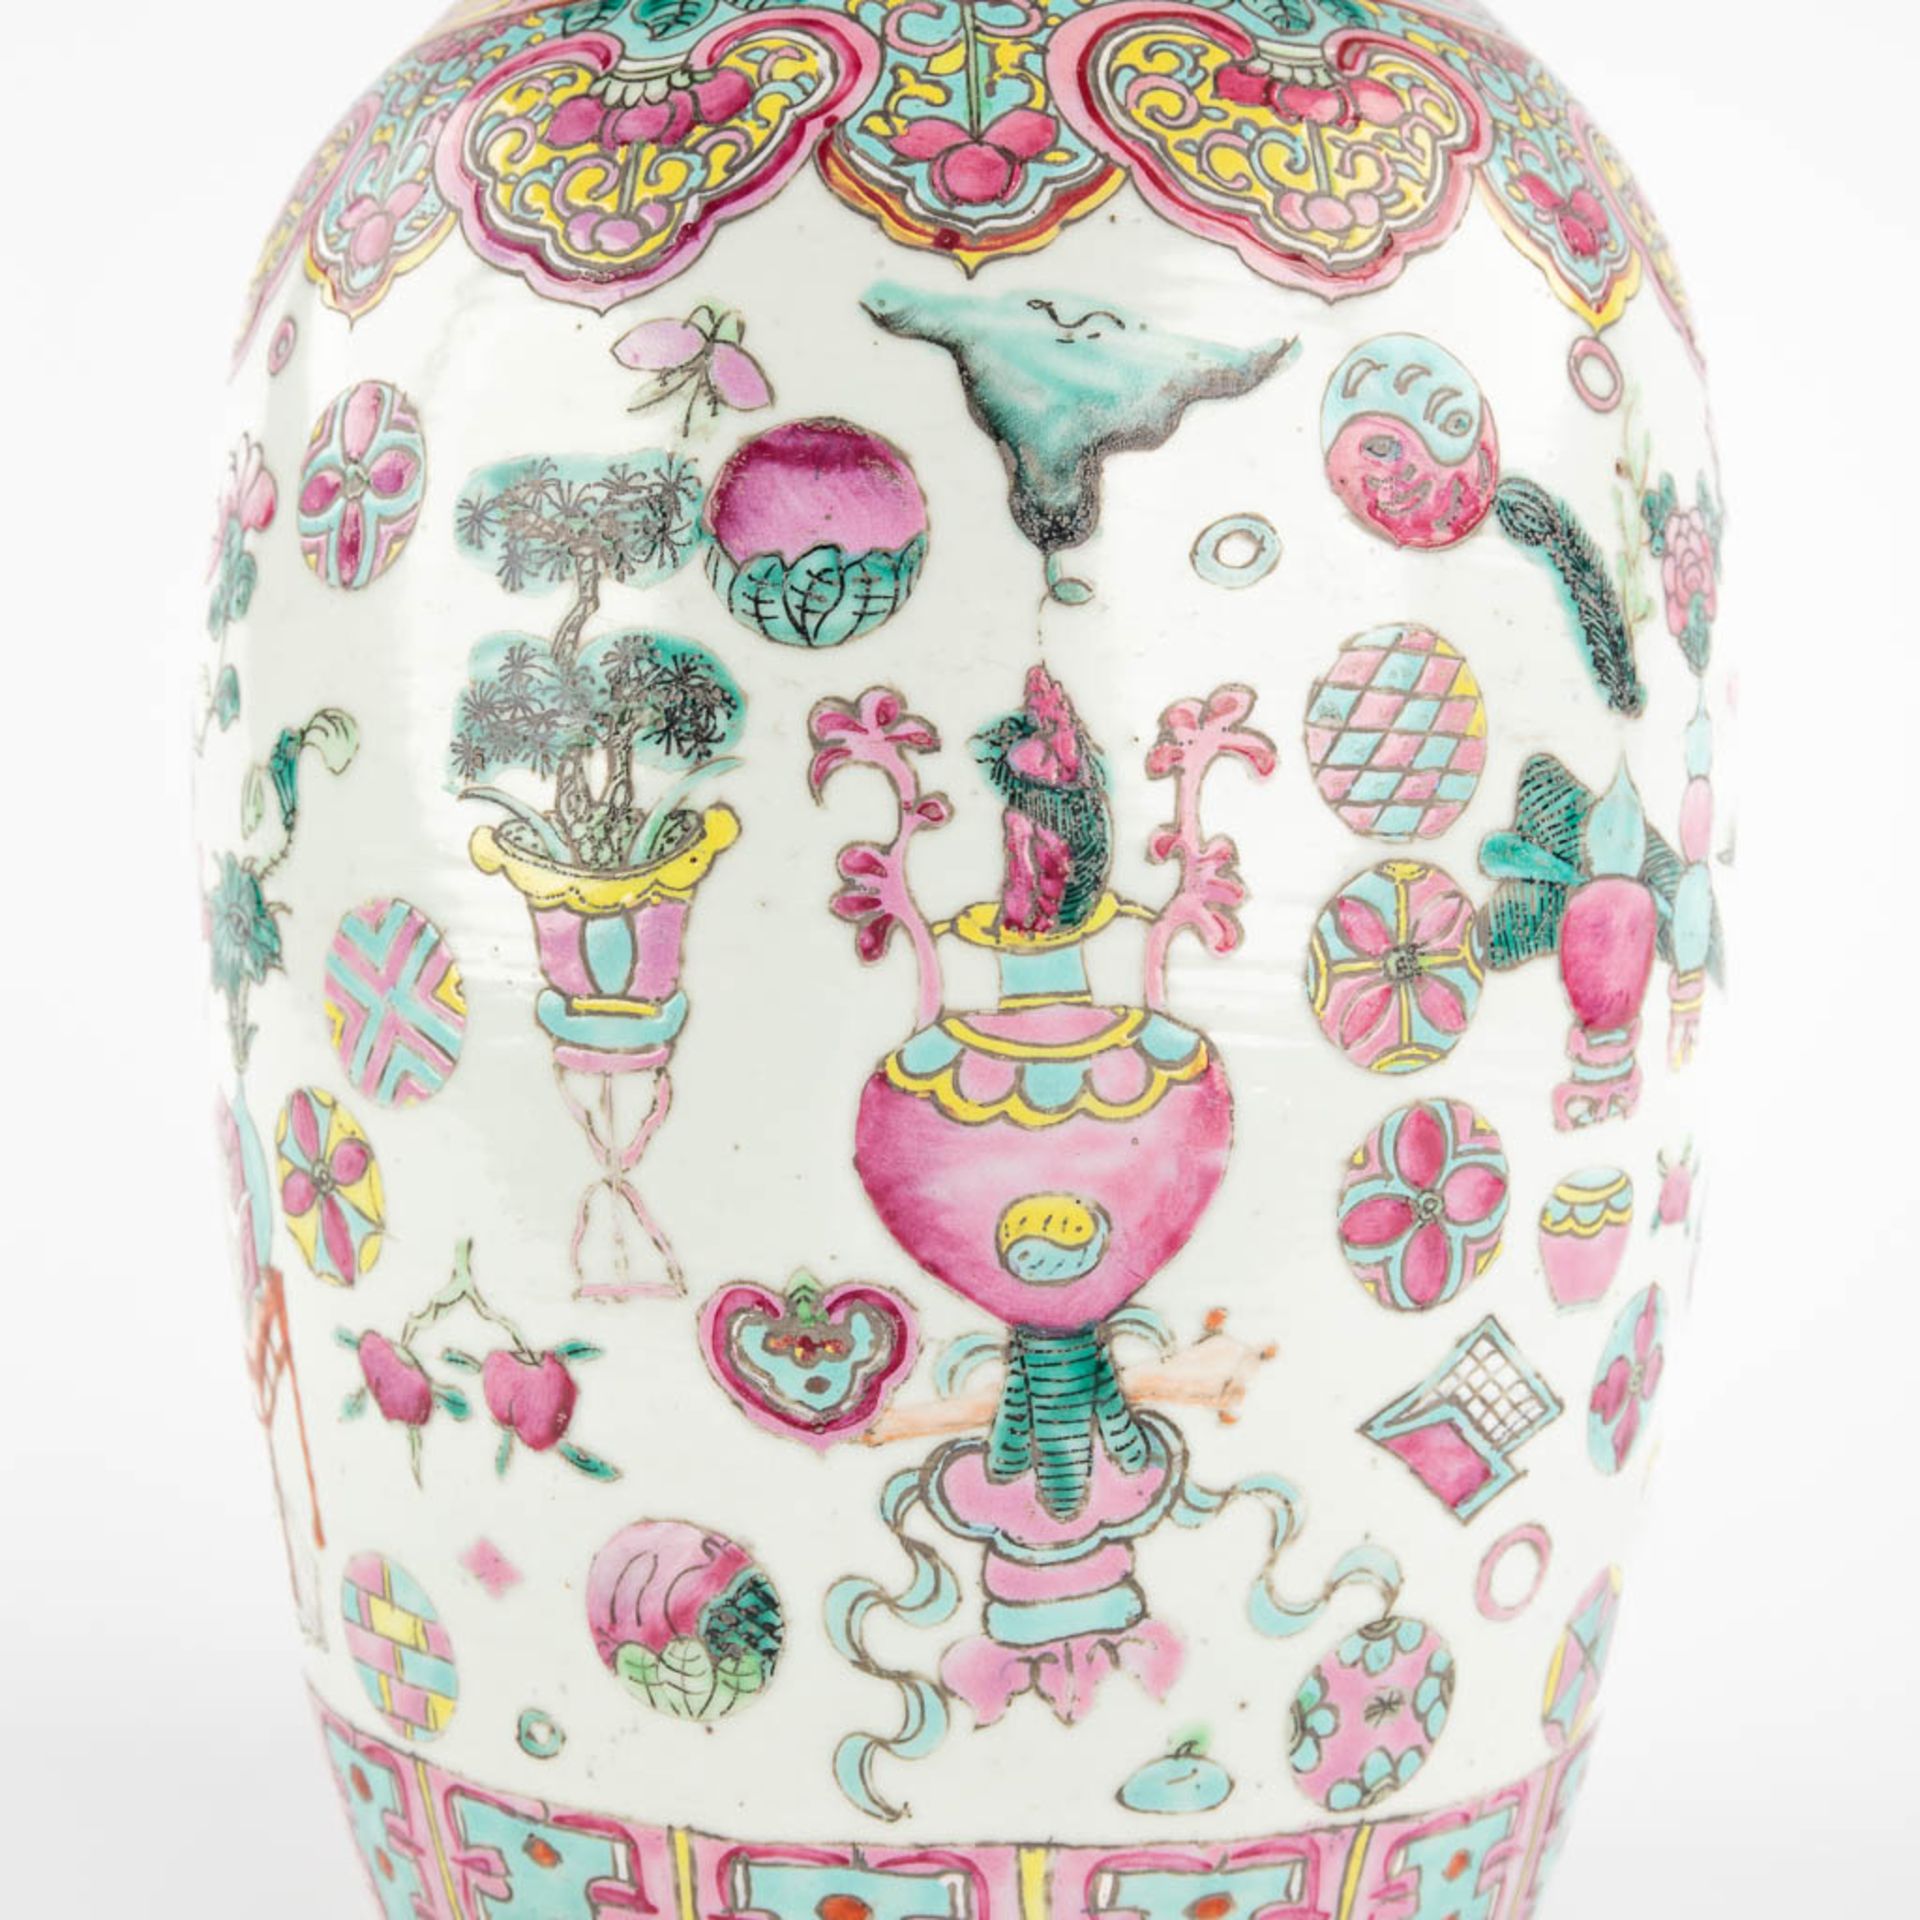 A Chinese vase with a decor of antiquities. 19th/20th C. (H:44 x D:21 cm) - Image 11 of 11